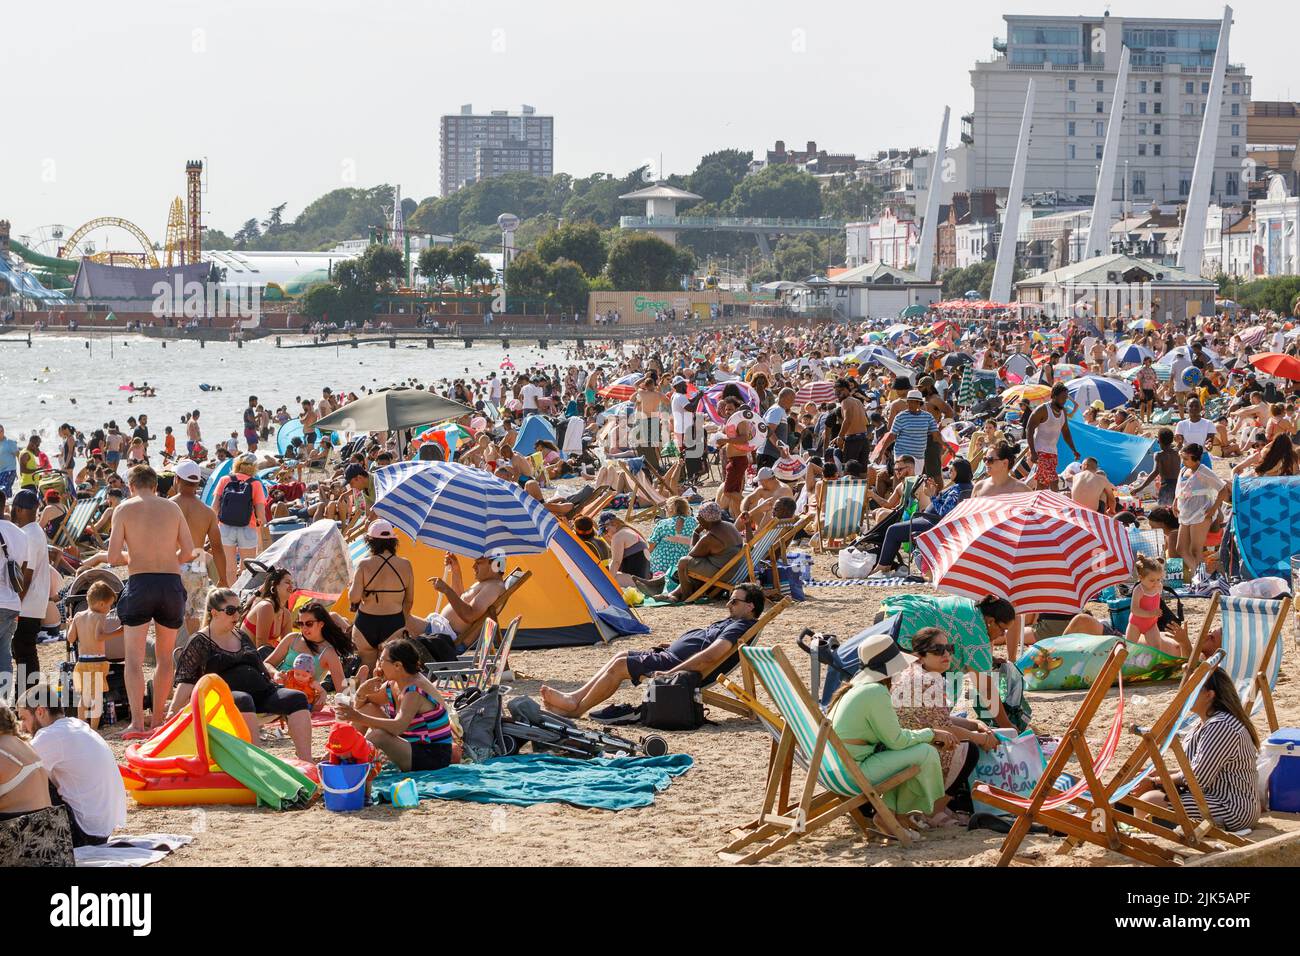 Packed Beach. Thousands of people at the beach on a hot sunny day. Summer, 2022 heatwave, Southend on Sea, Jubilee Beach. Stock Photo